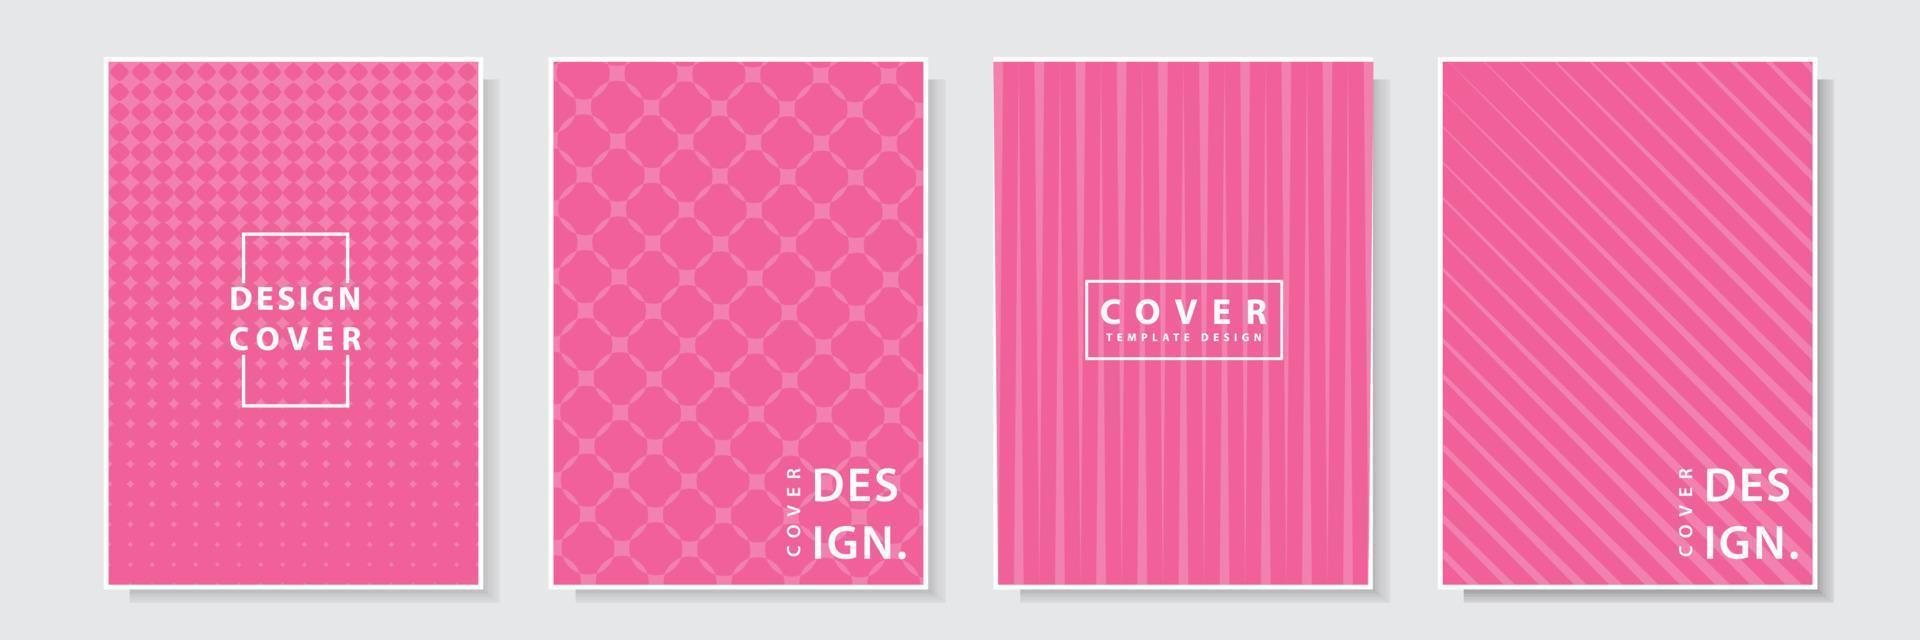 cover template with pattern texture background pink color set collection vector design